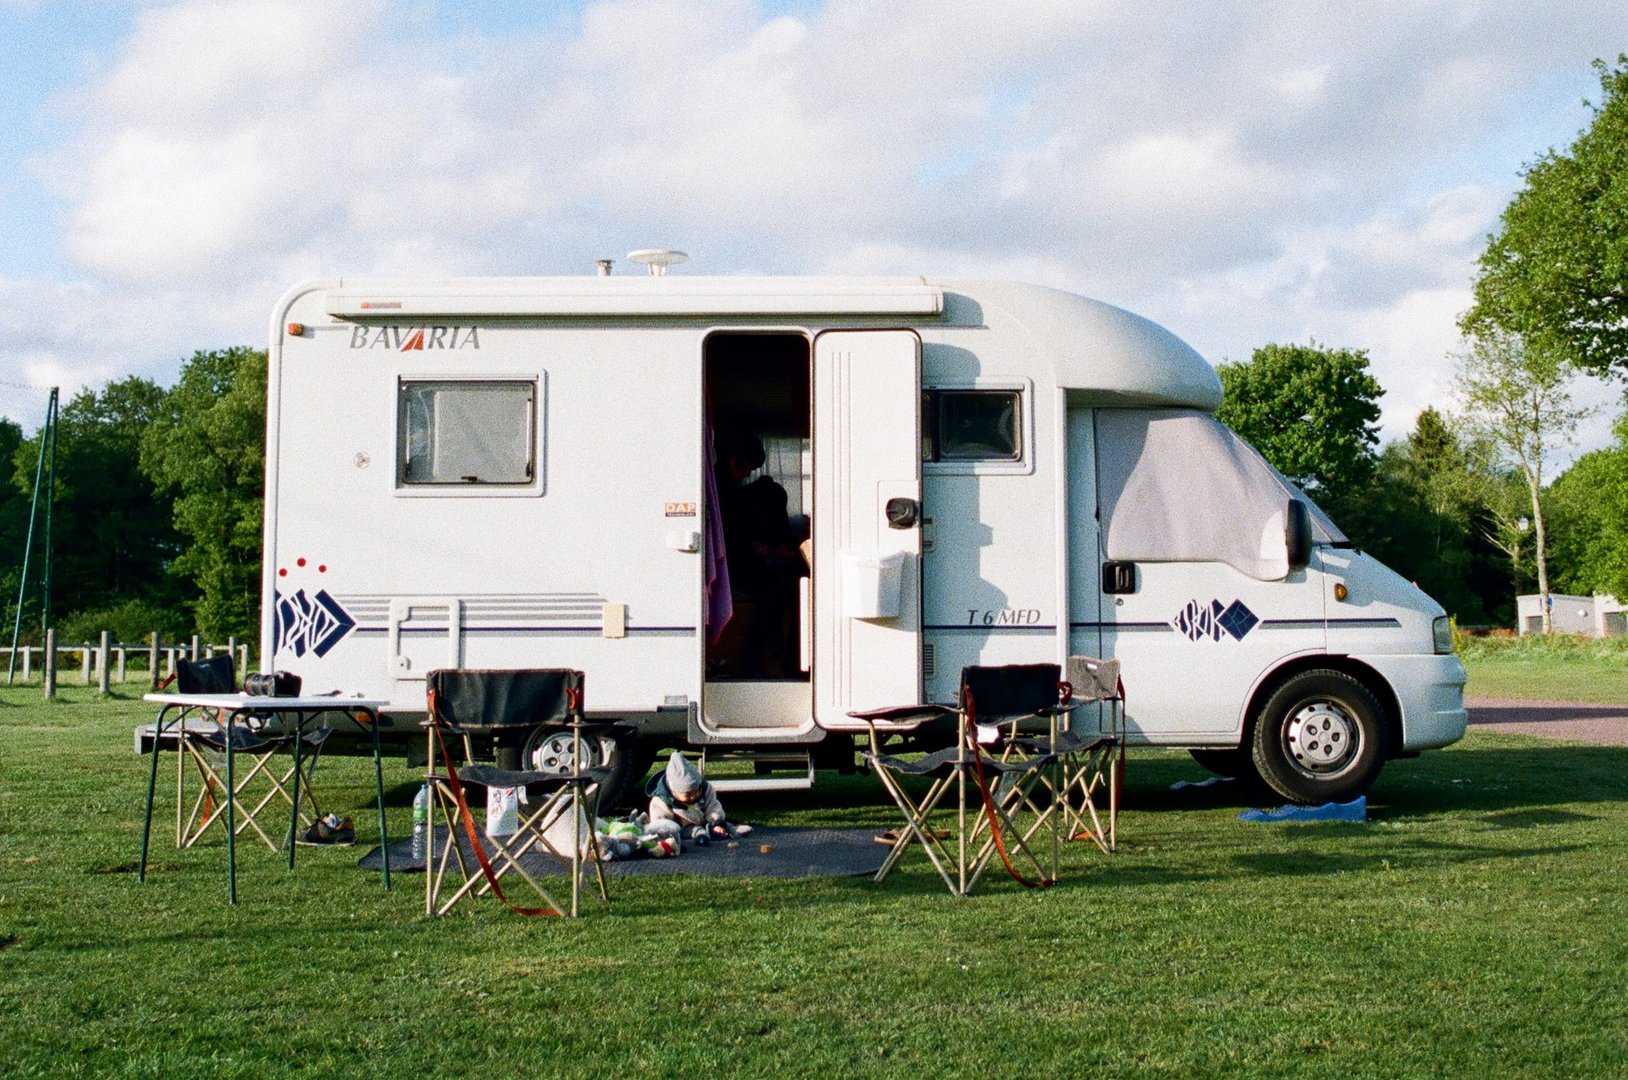 A motorhome in the UK